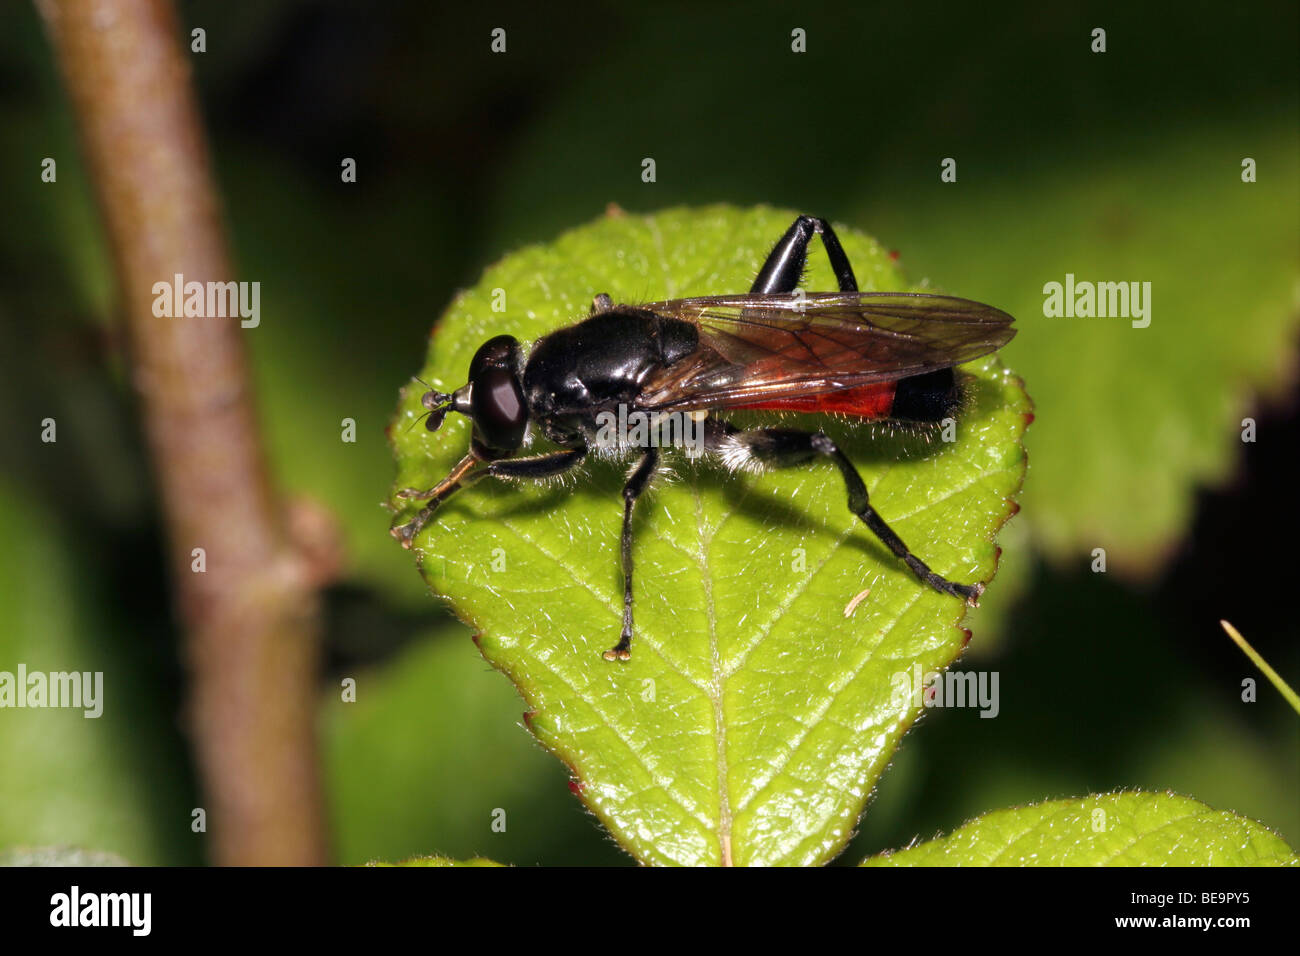 Blood-belted woodsman hover fly (Brachypalpoides lenta : Syrphidae) in woodland, UK. Stock Photo